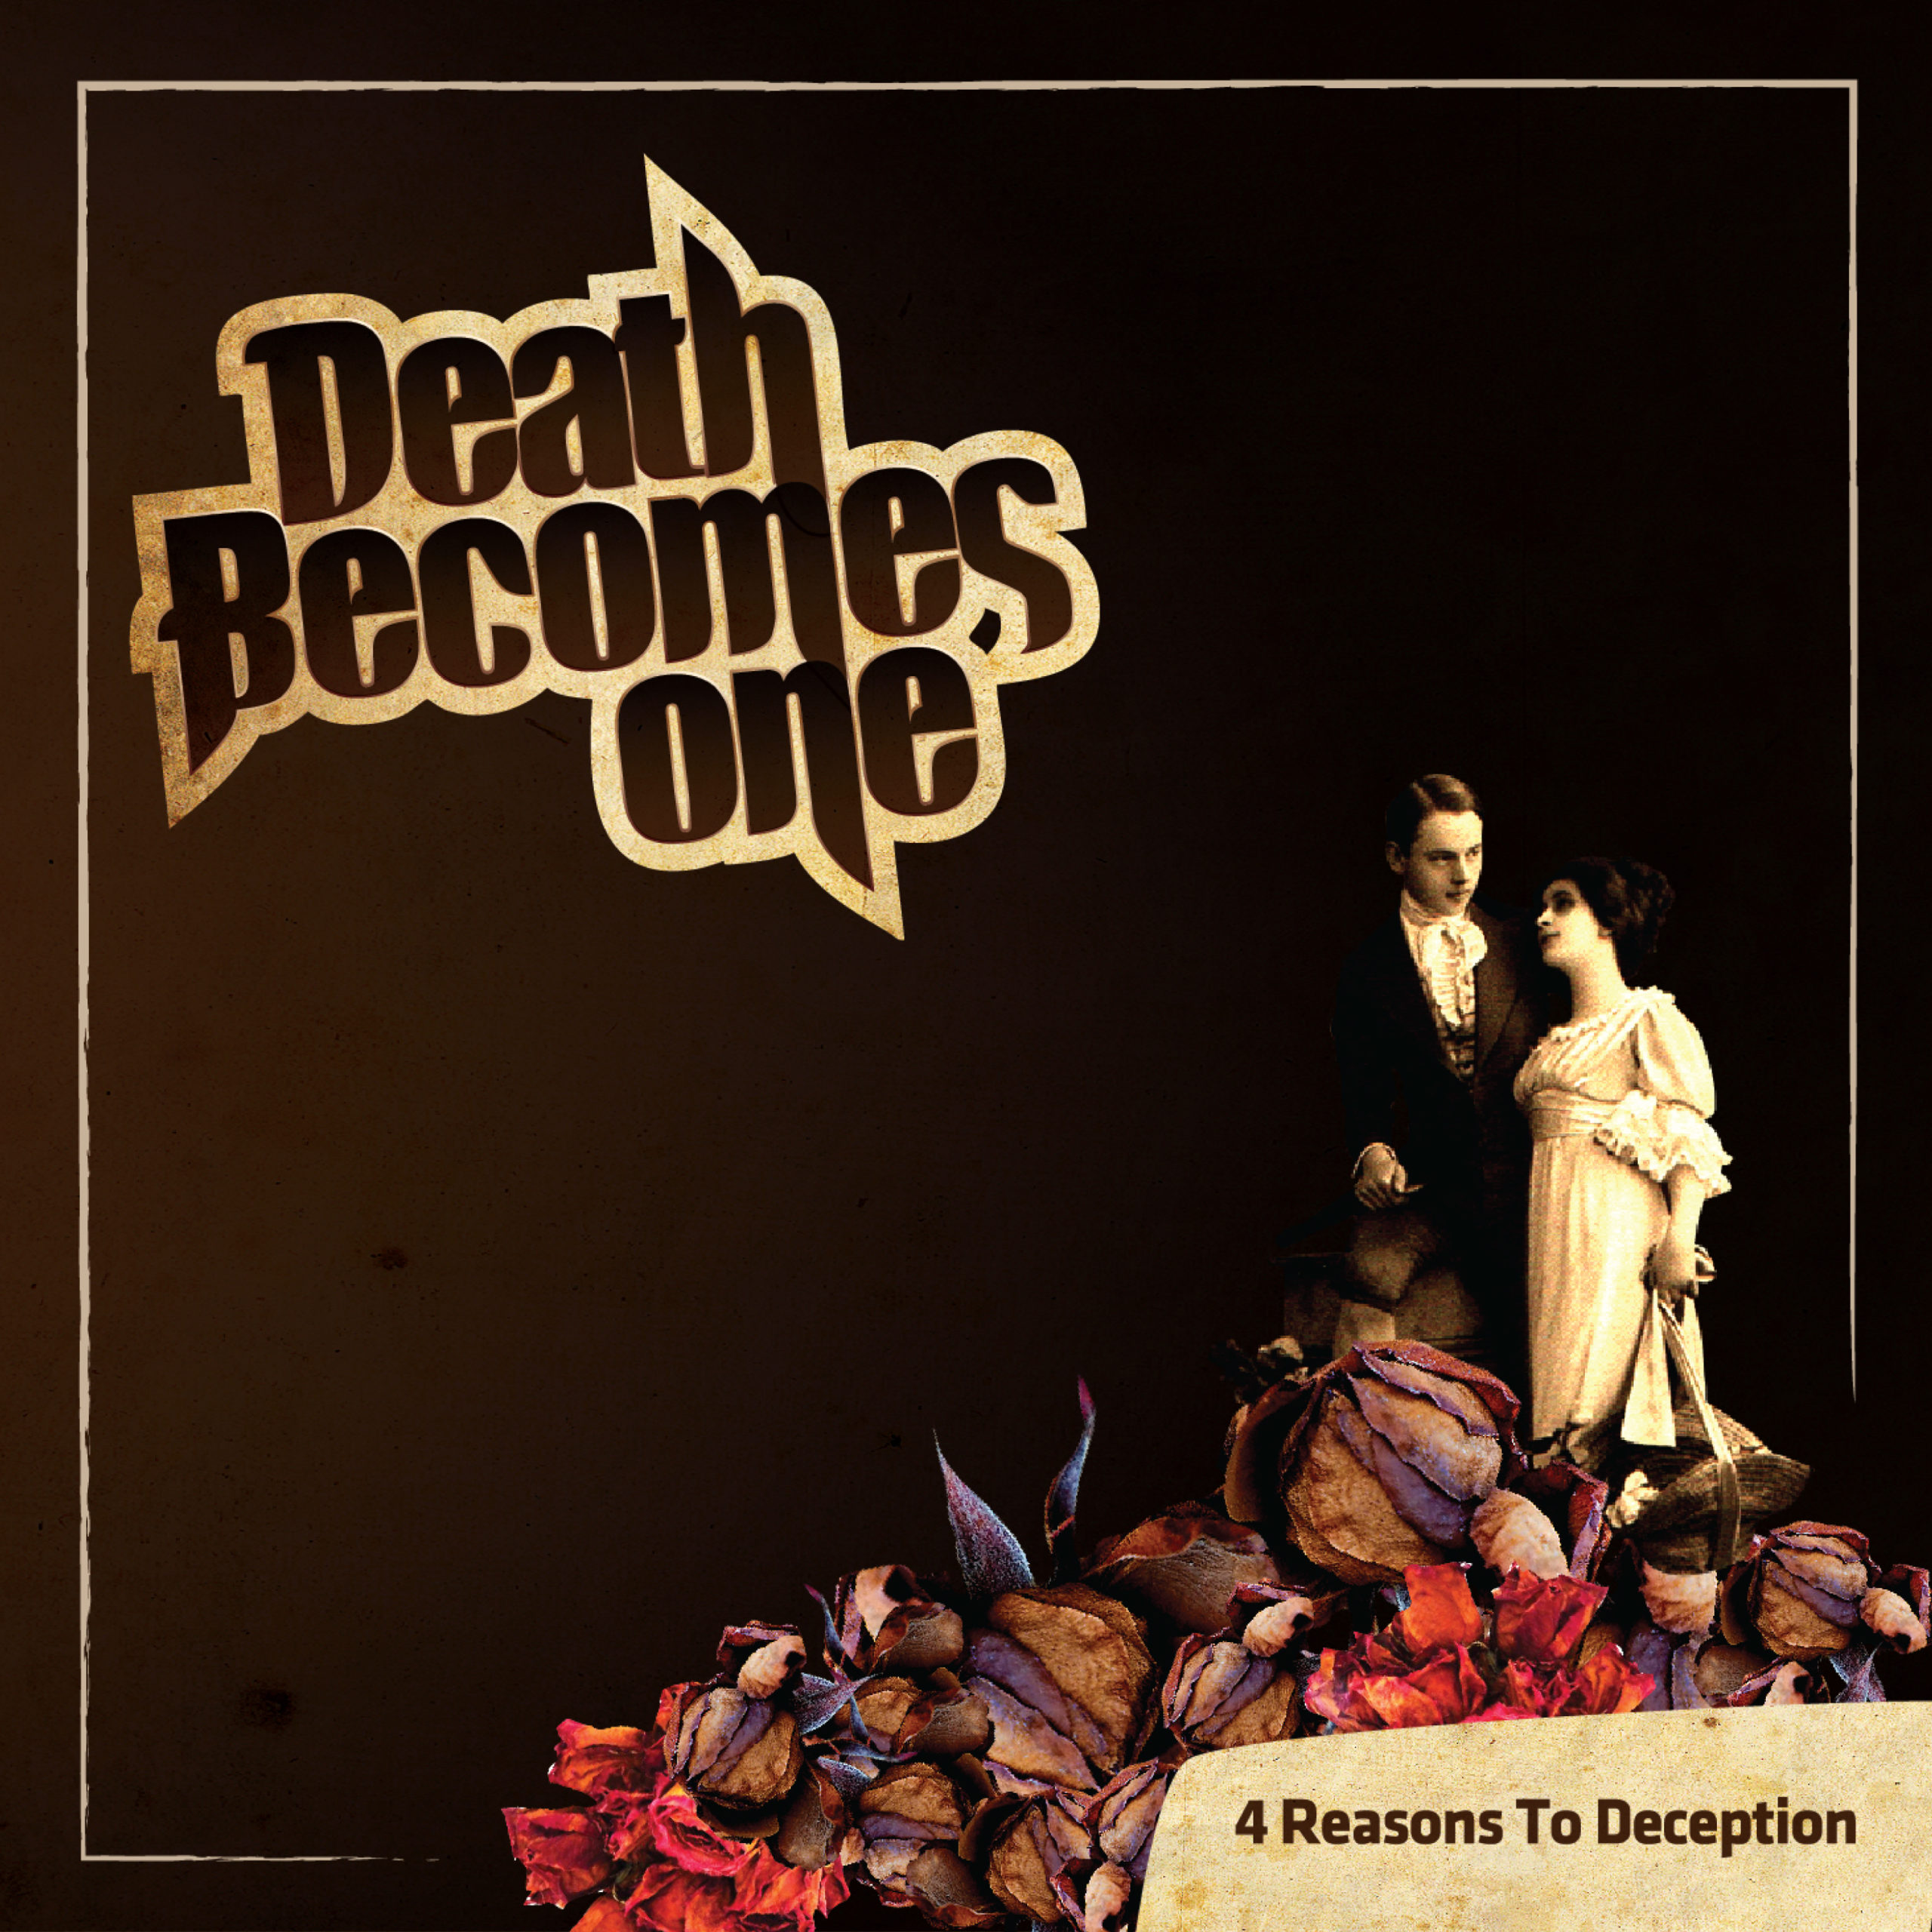 Death Becomes One - 4 Reasons to deception, debut EP from the Miami, Florida based metal band